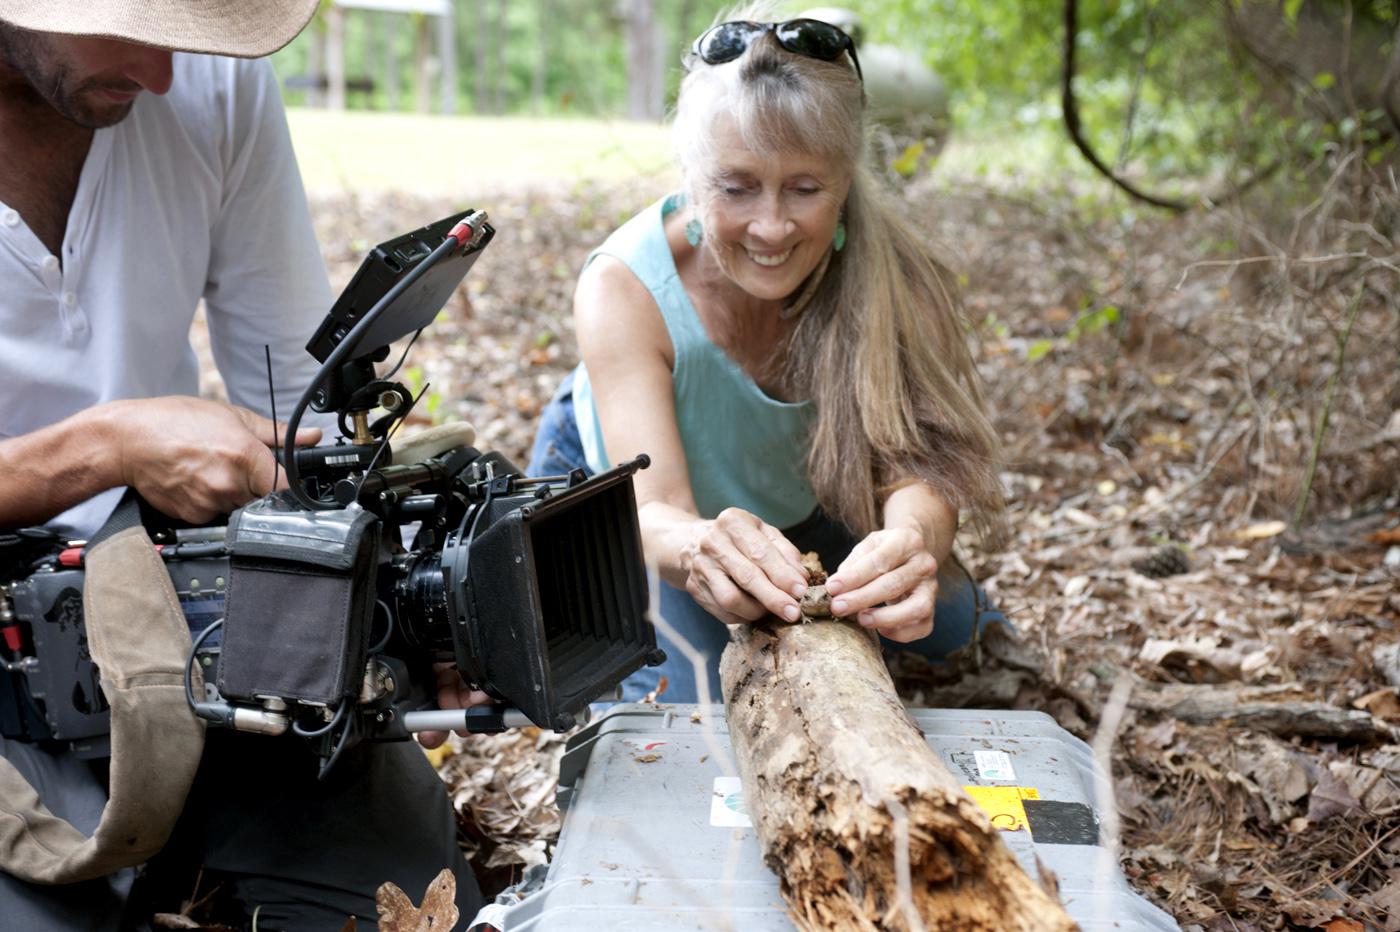 In early May, Mississippi State University wildlife professor Jeanne Jones worked with BBC film crews shooting footage of toads' ability to capture prey. (Photo by MSU University Relations/Megan Bean)